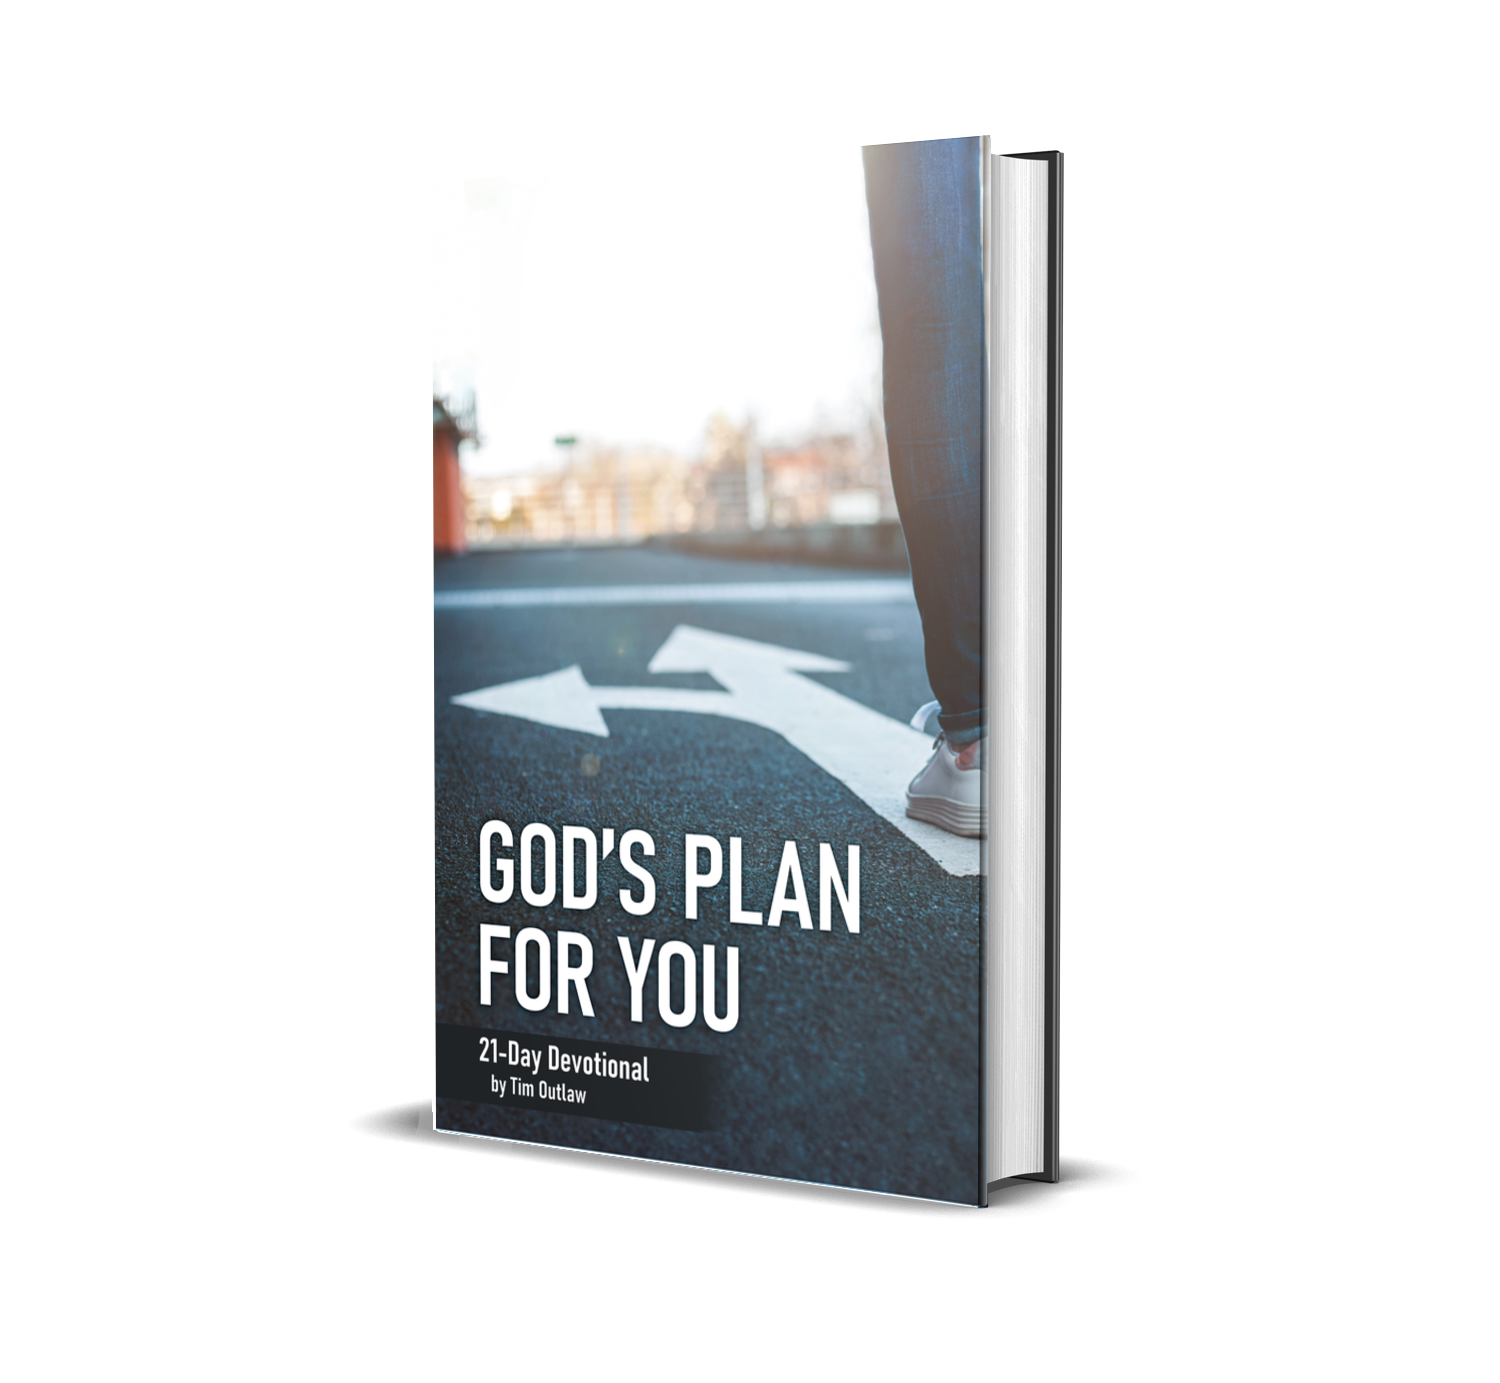 Tim Outlaw a first-time author just published a 21 Day Devotional titled "God's Plan For You"